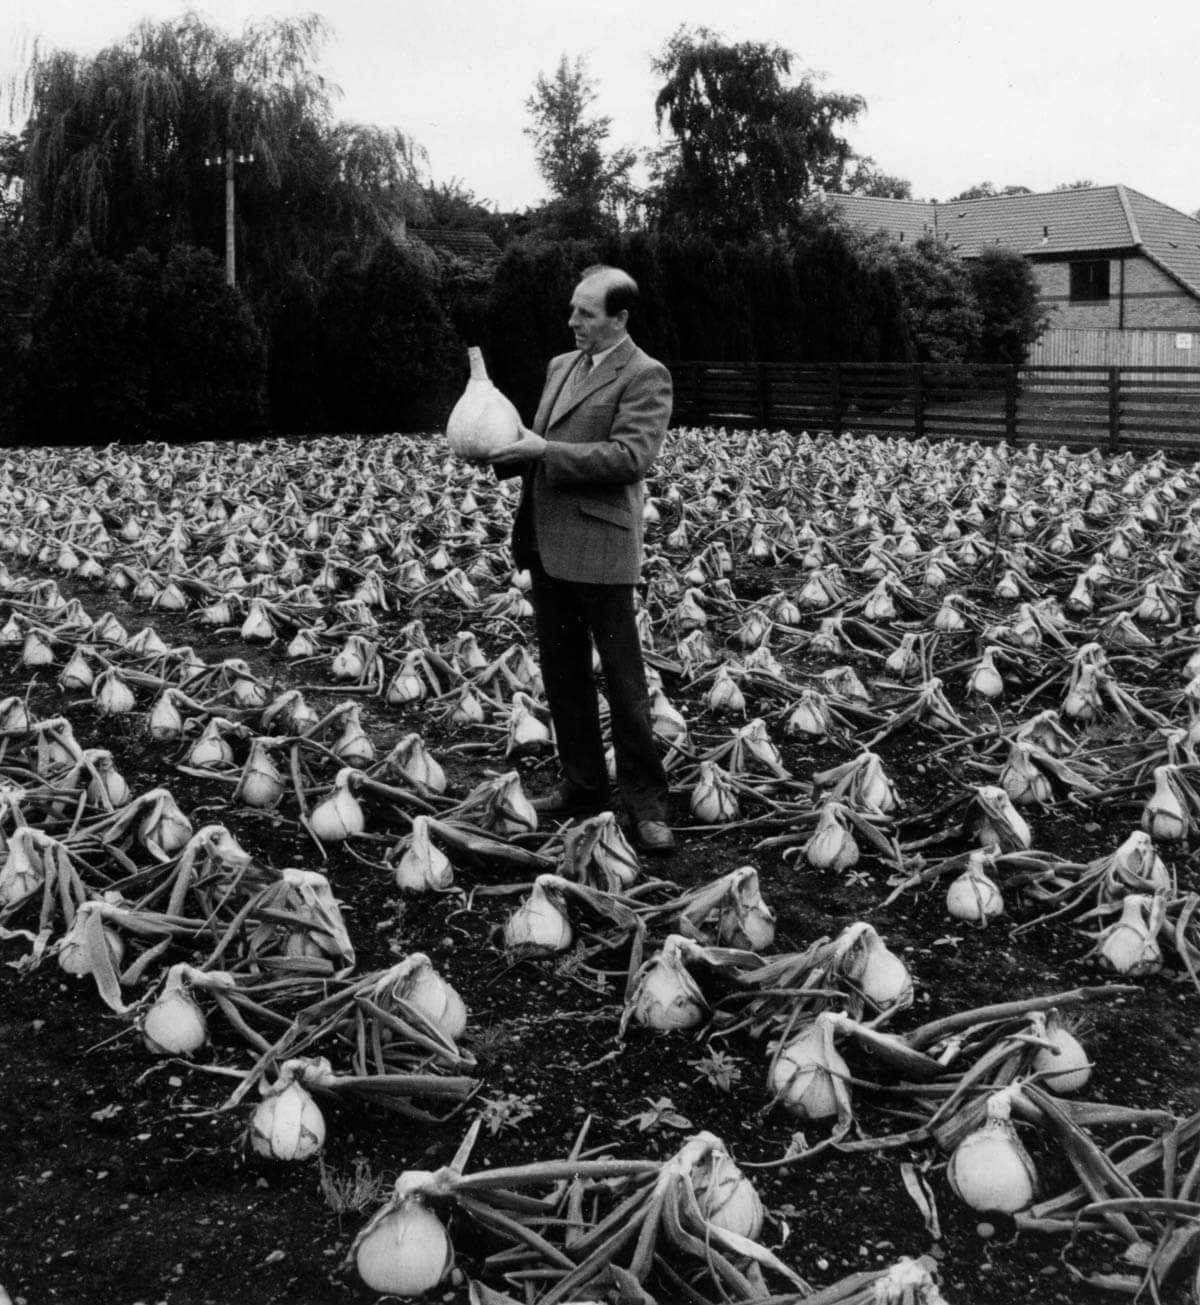 Hector Innes, “Robin Hogg holding the heaviest onion on world record, an onion of the Kelsae variety grown by Mr Ednie of Fife. From ca. 1965 to 1996 Hogg was responsible for the seed production and development of the Kelsae seed variety in Kelso, Scotland,” ca. 1995. Courtesy Robin Hogg.